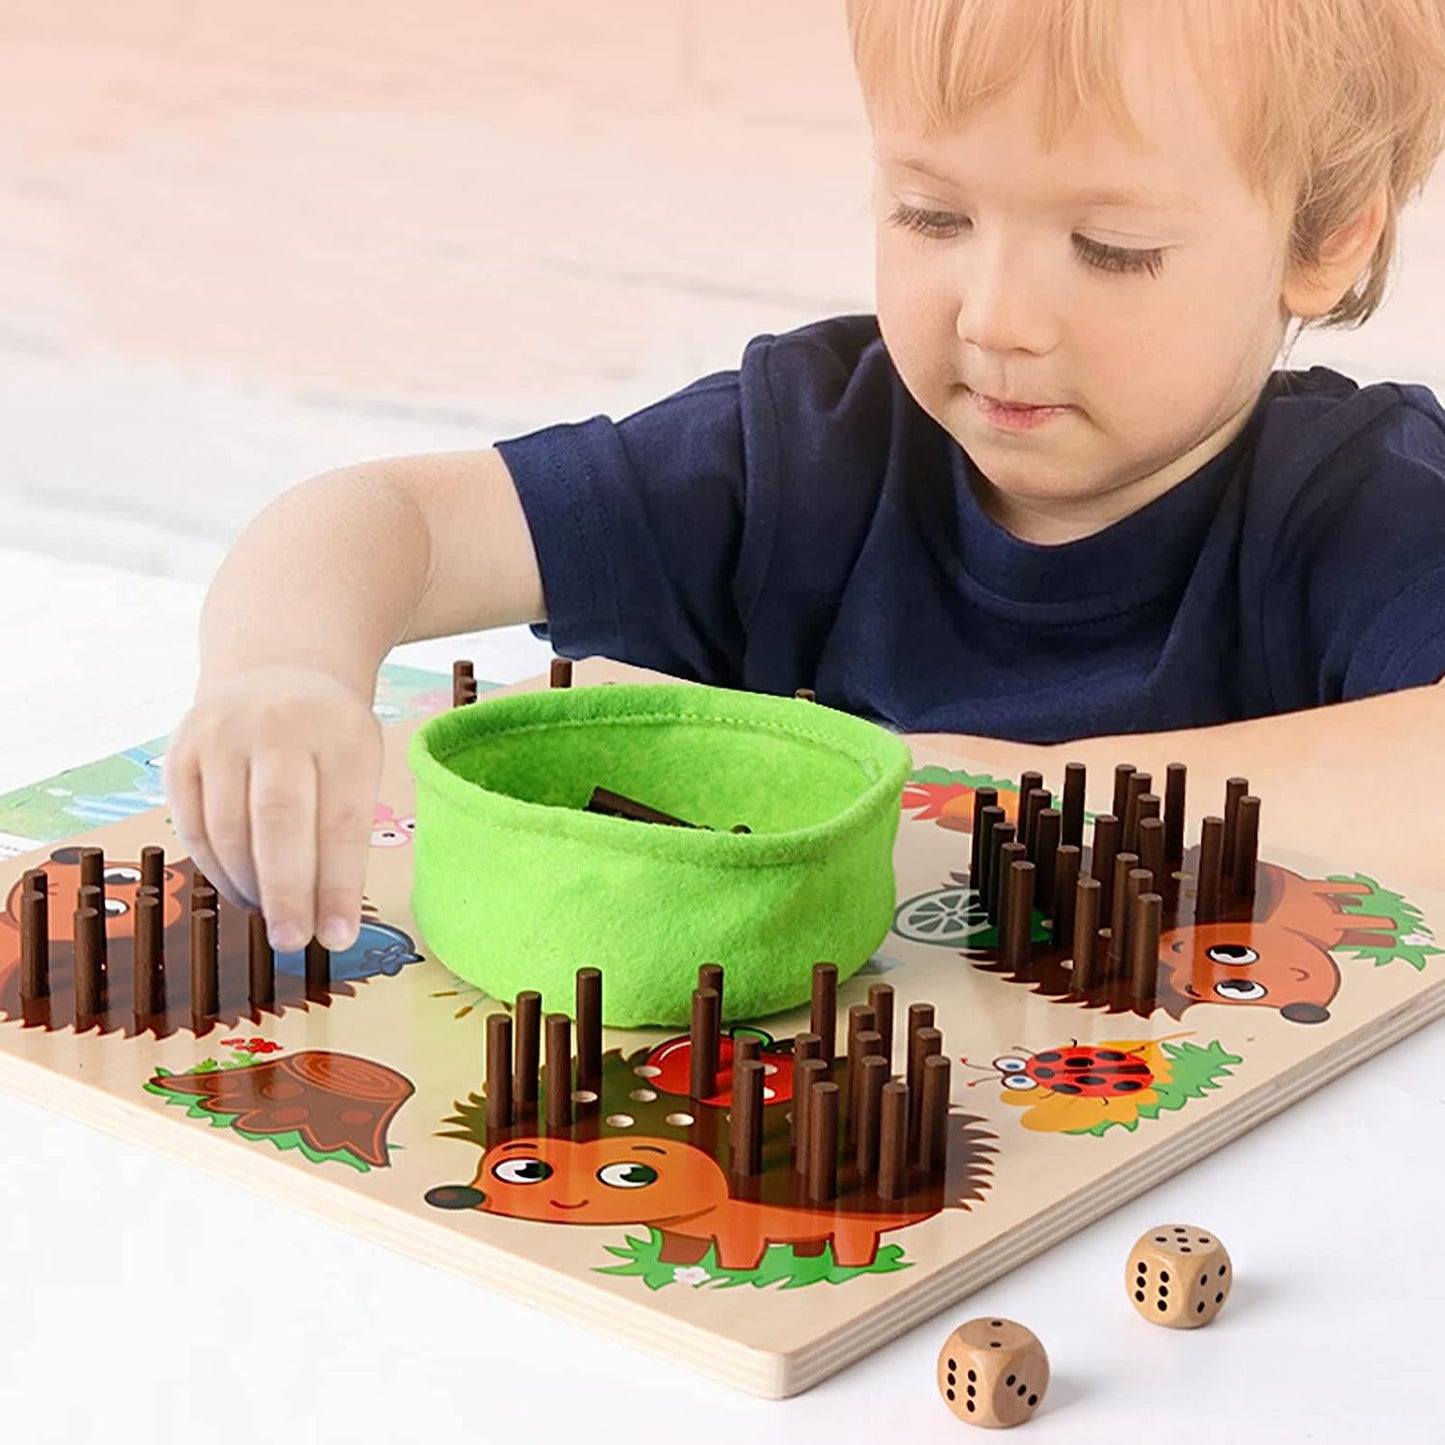 Hedgehog Board Learning Toy Fine Motor Skills for Toddler Children Party Favors Ages 3+，Birthday，Chris as, Most Popular Cooperative Board Game for Boys and Girls